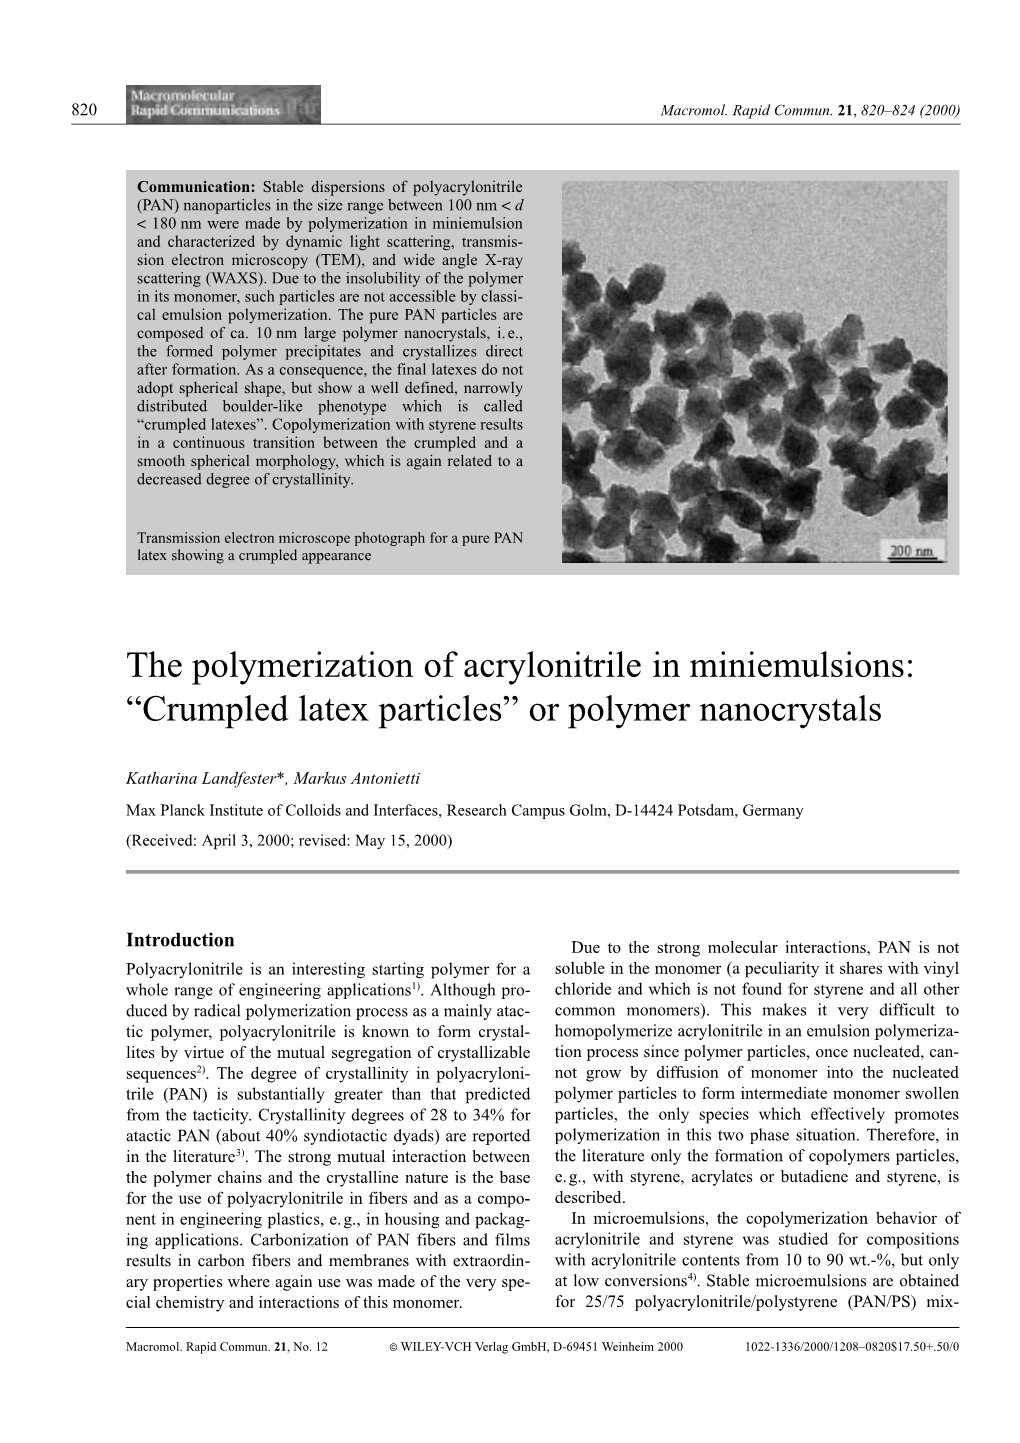 The Polymerization of Acrylonitrile in Miniemulsions: “Crumpled Latex Particles” Or Polymer Nanocrystals